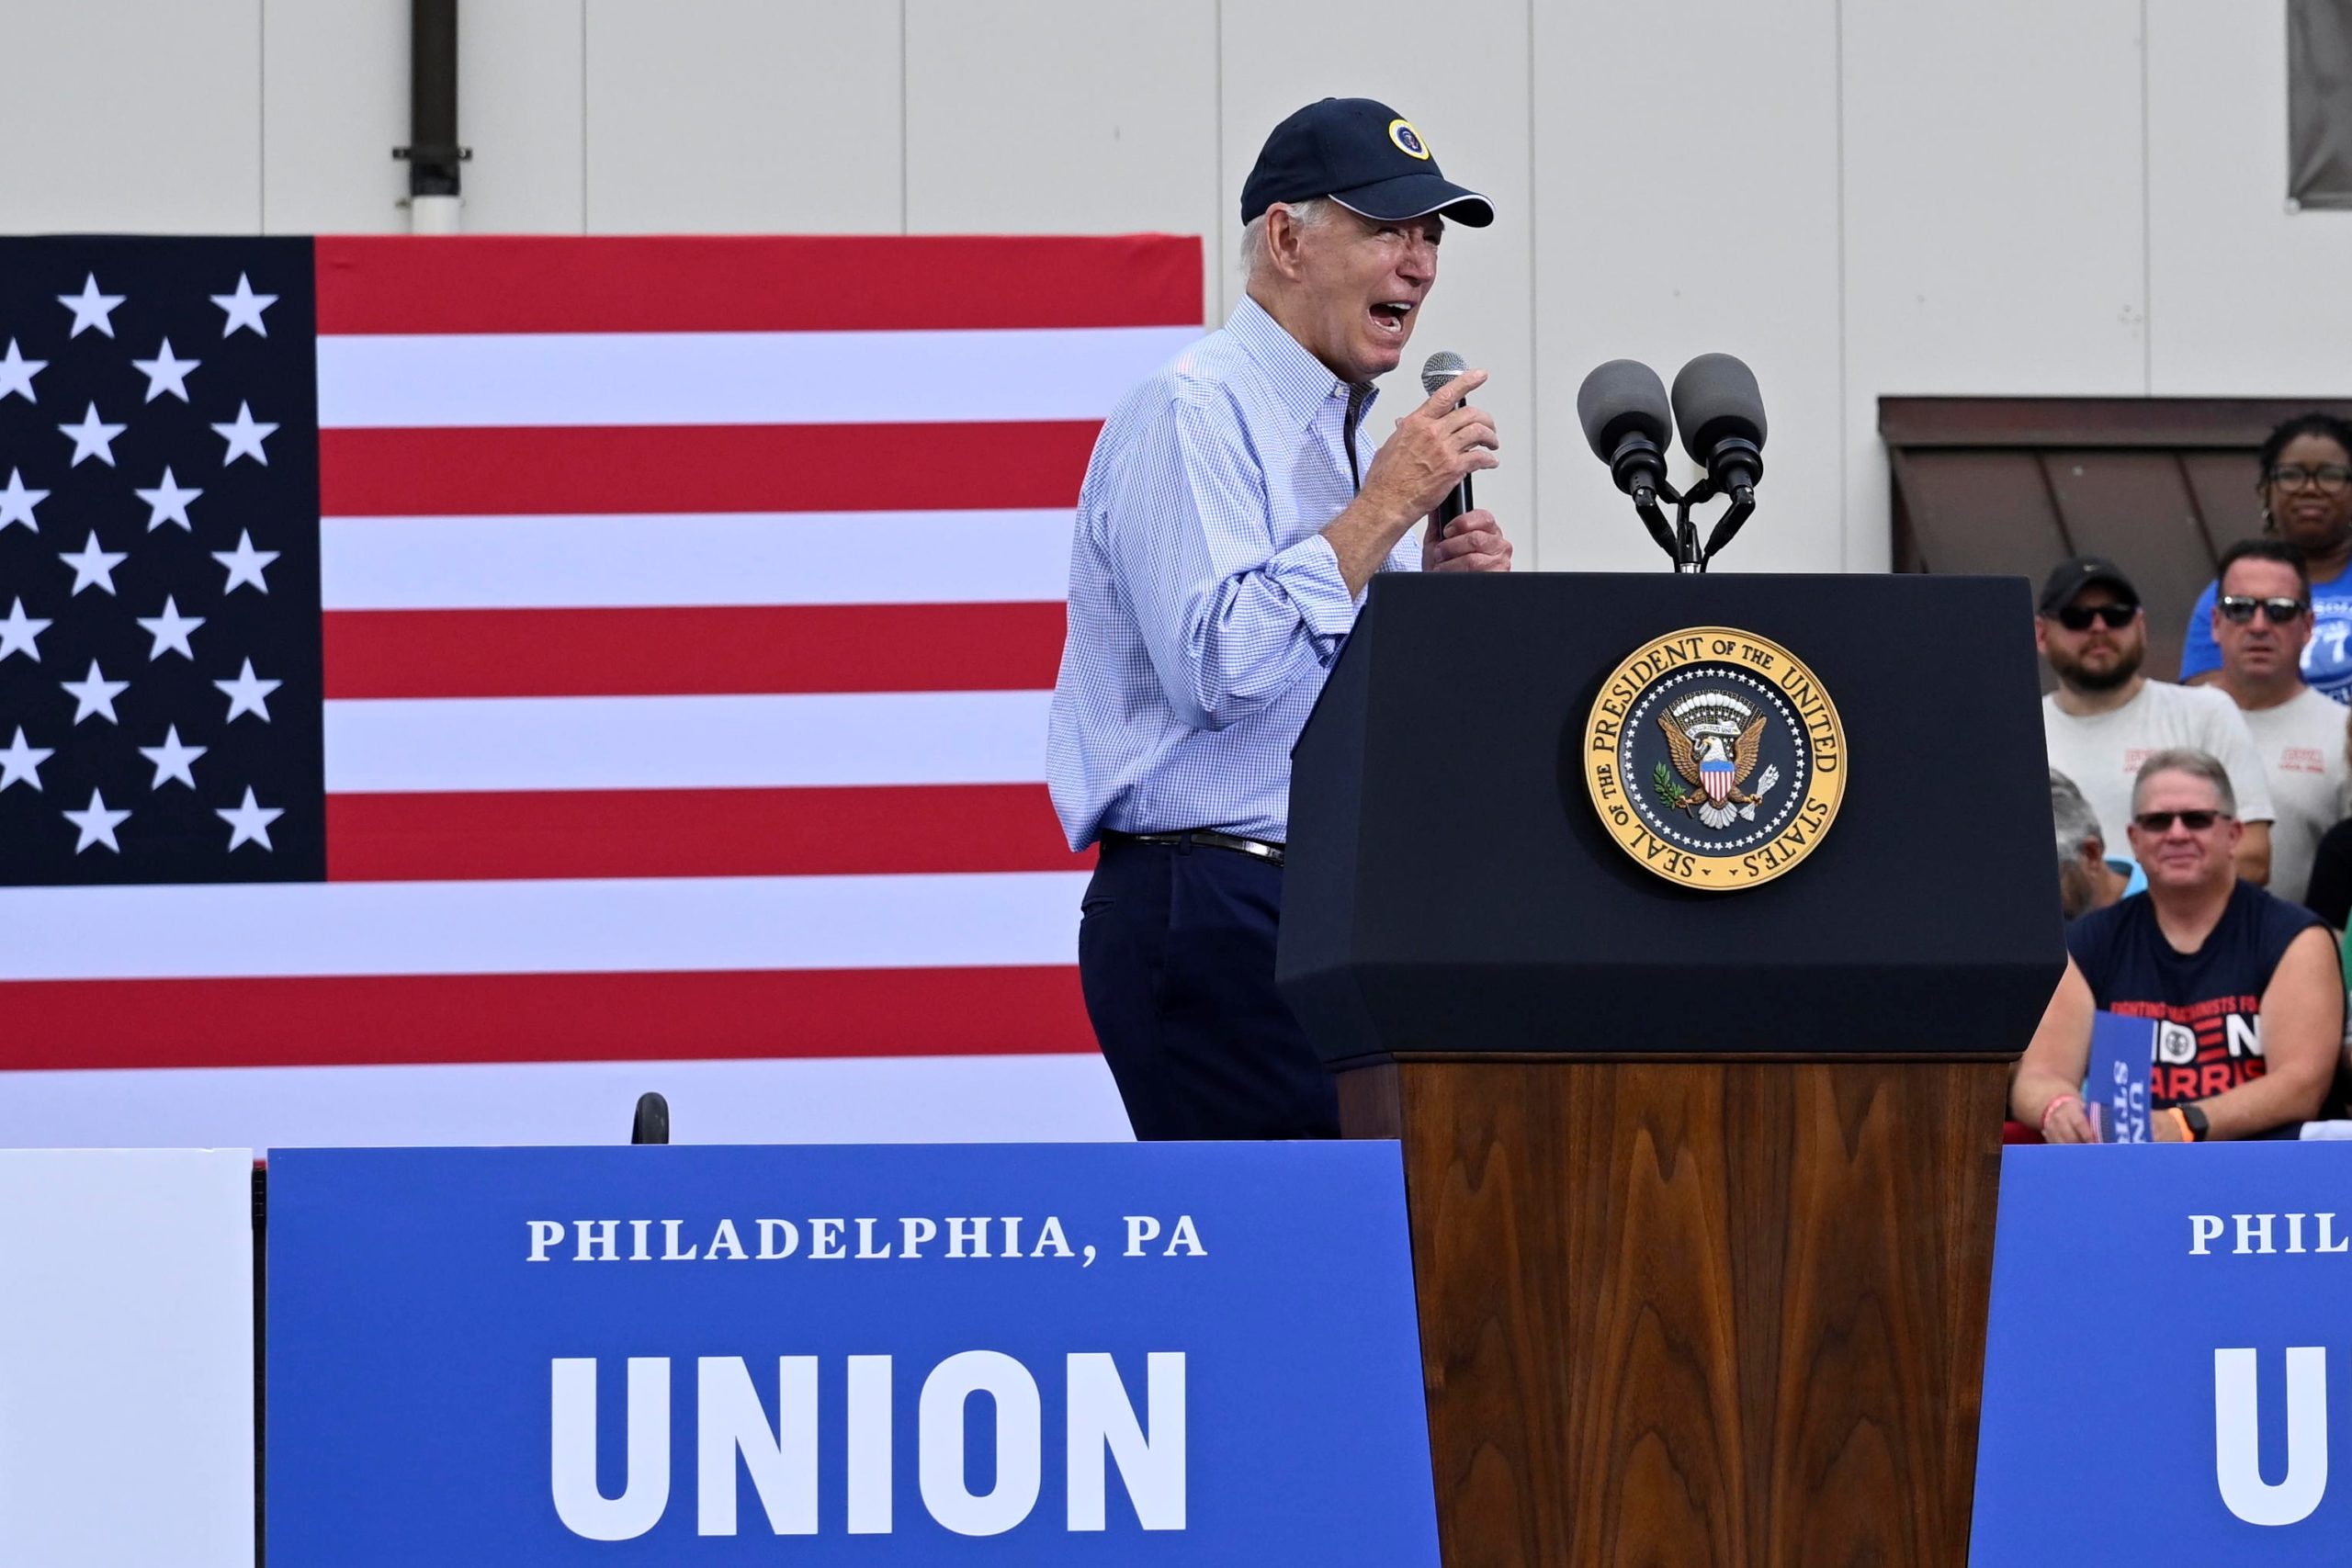 U.S. President Joe Biden addresses union workers at Sheet Metal Workers Local 19 on September 4, 2023 in Philadelphia, Pennsylvania. During his speech, President Biden talked about his record on job creation and support for labor unions. (Photo by Mark Makela/Getty Images)